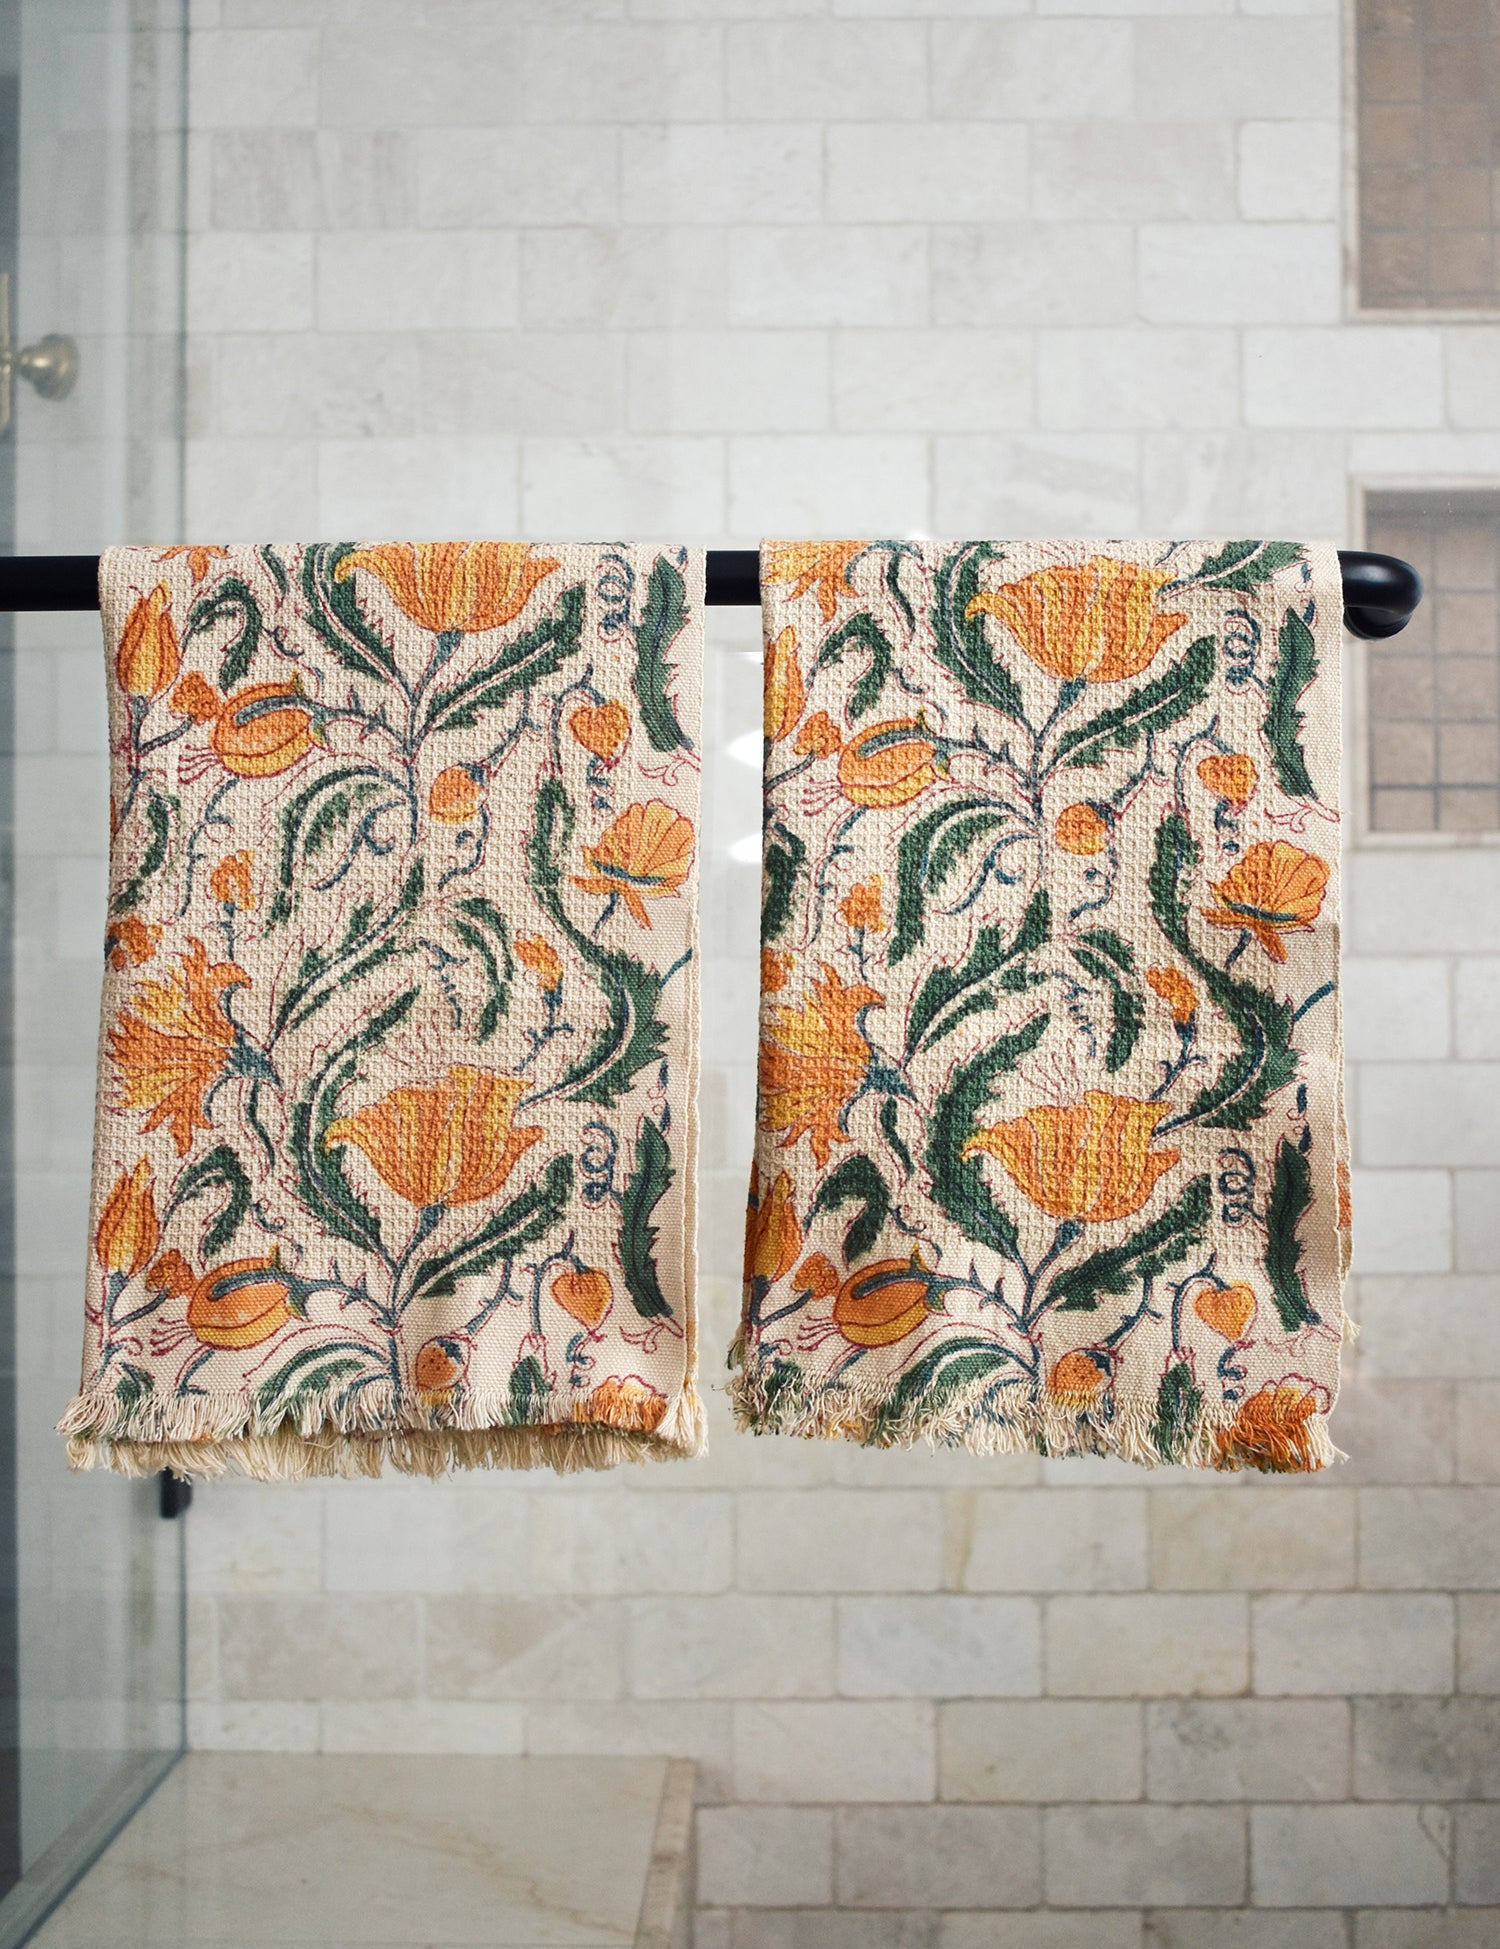 Block printed Tuscan hand towels hanging on a black rod outside a shower